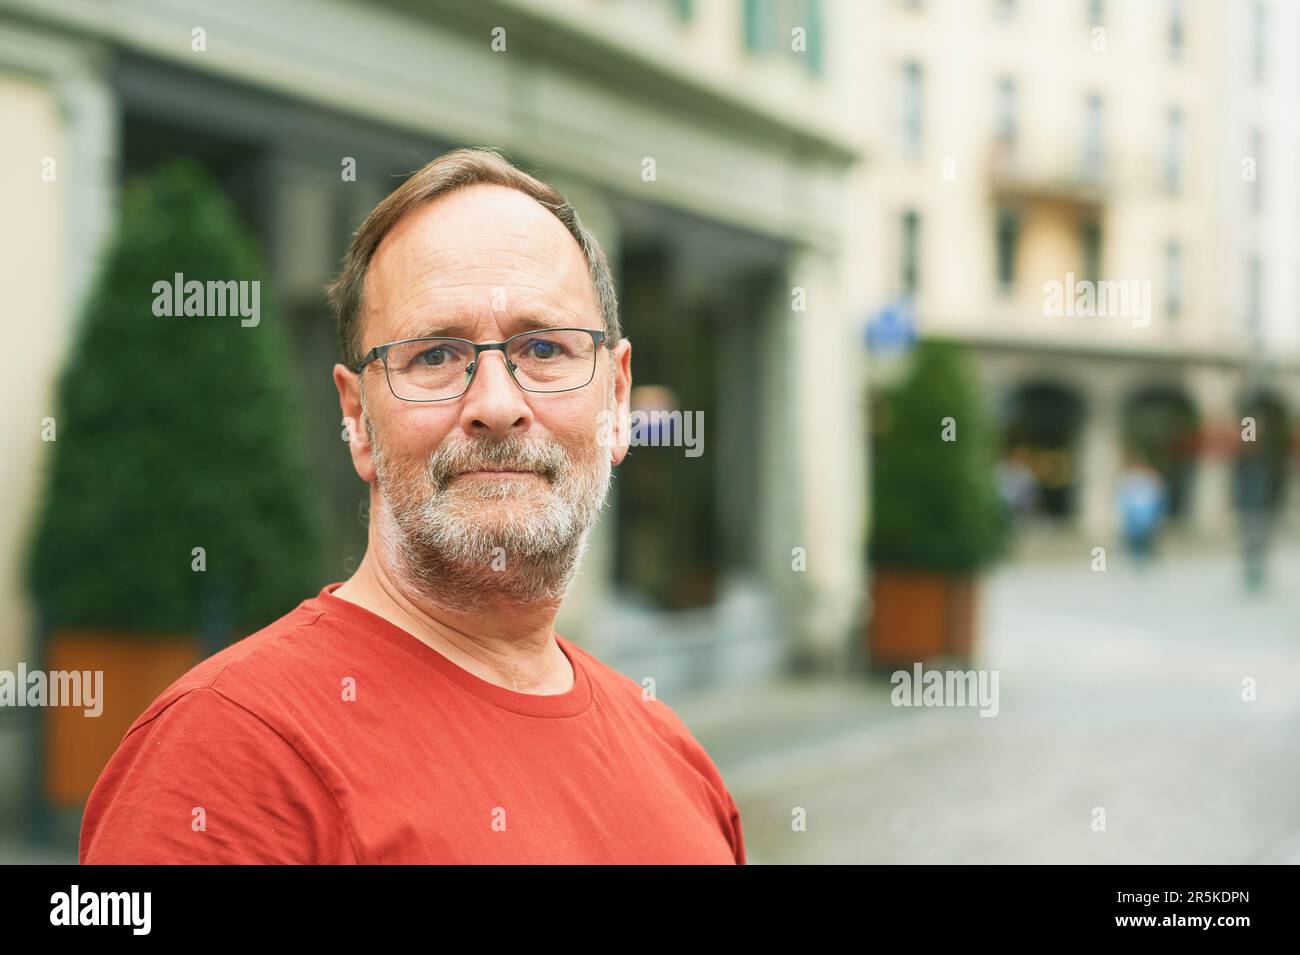 Outdoor portrait of middle age man on city street, wearing eyeglasses Stock Photo